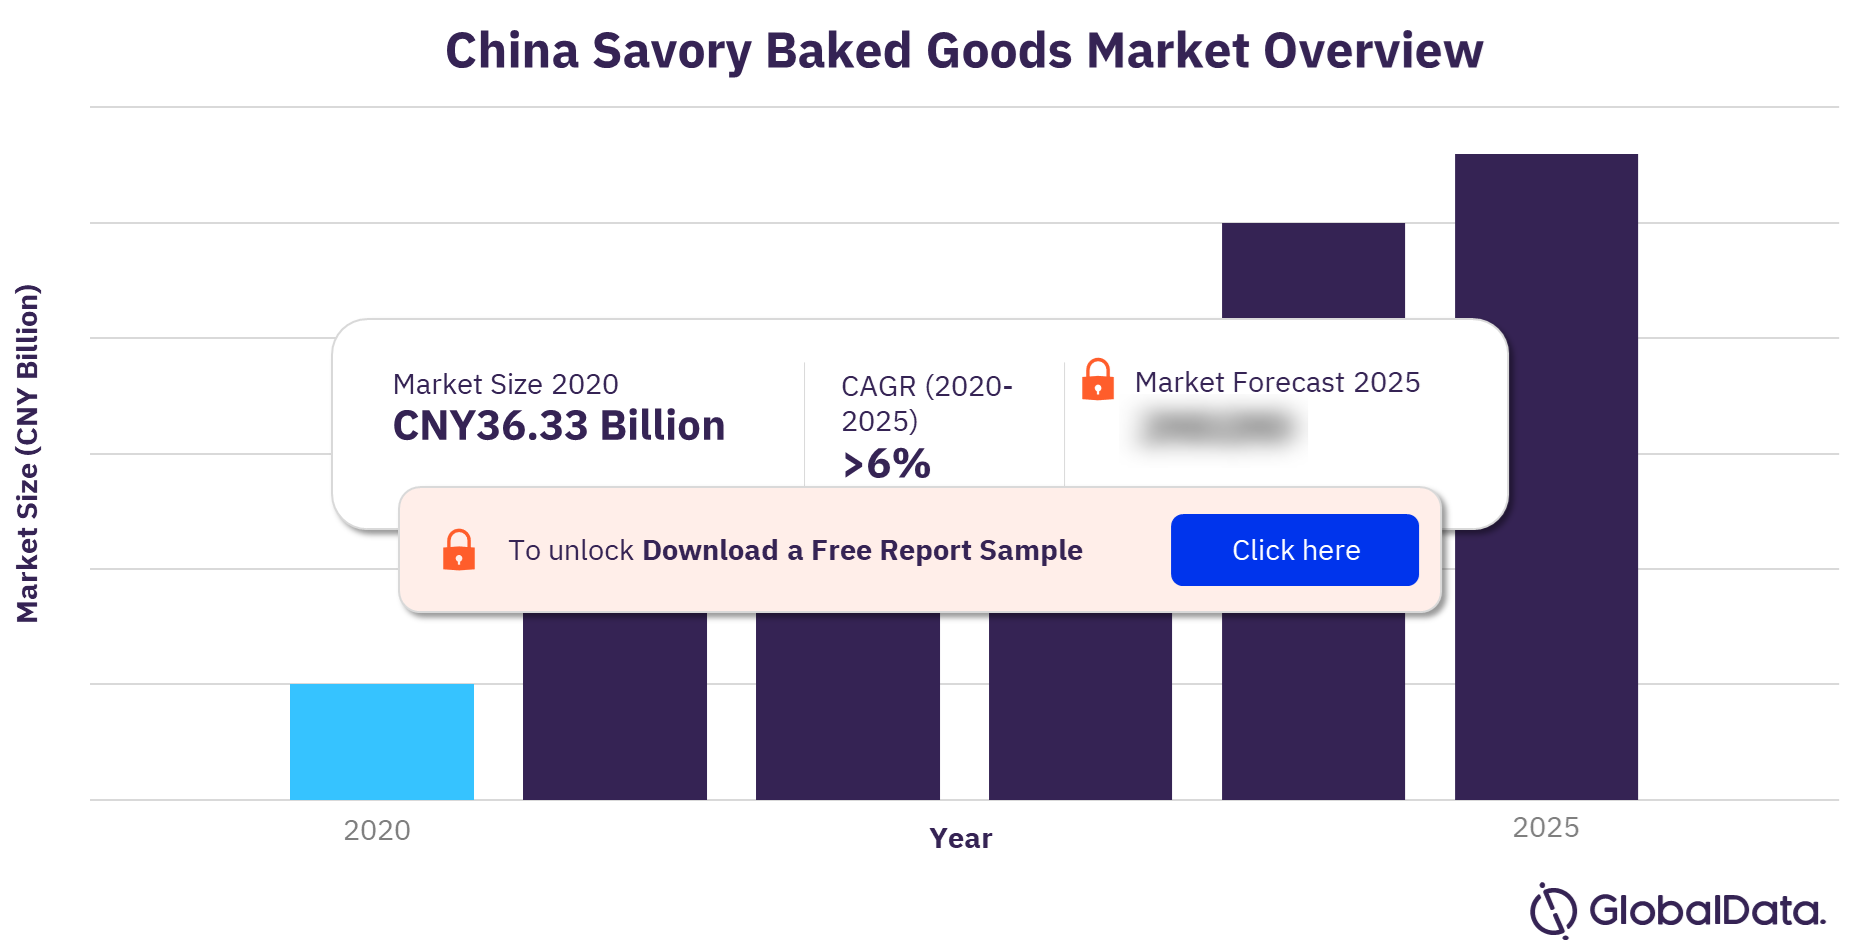 China savory baked goods market outlook 